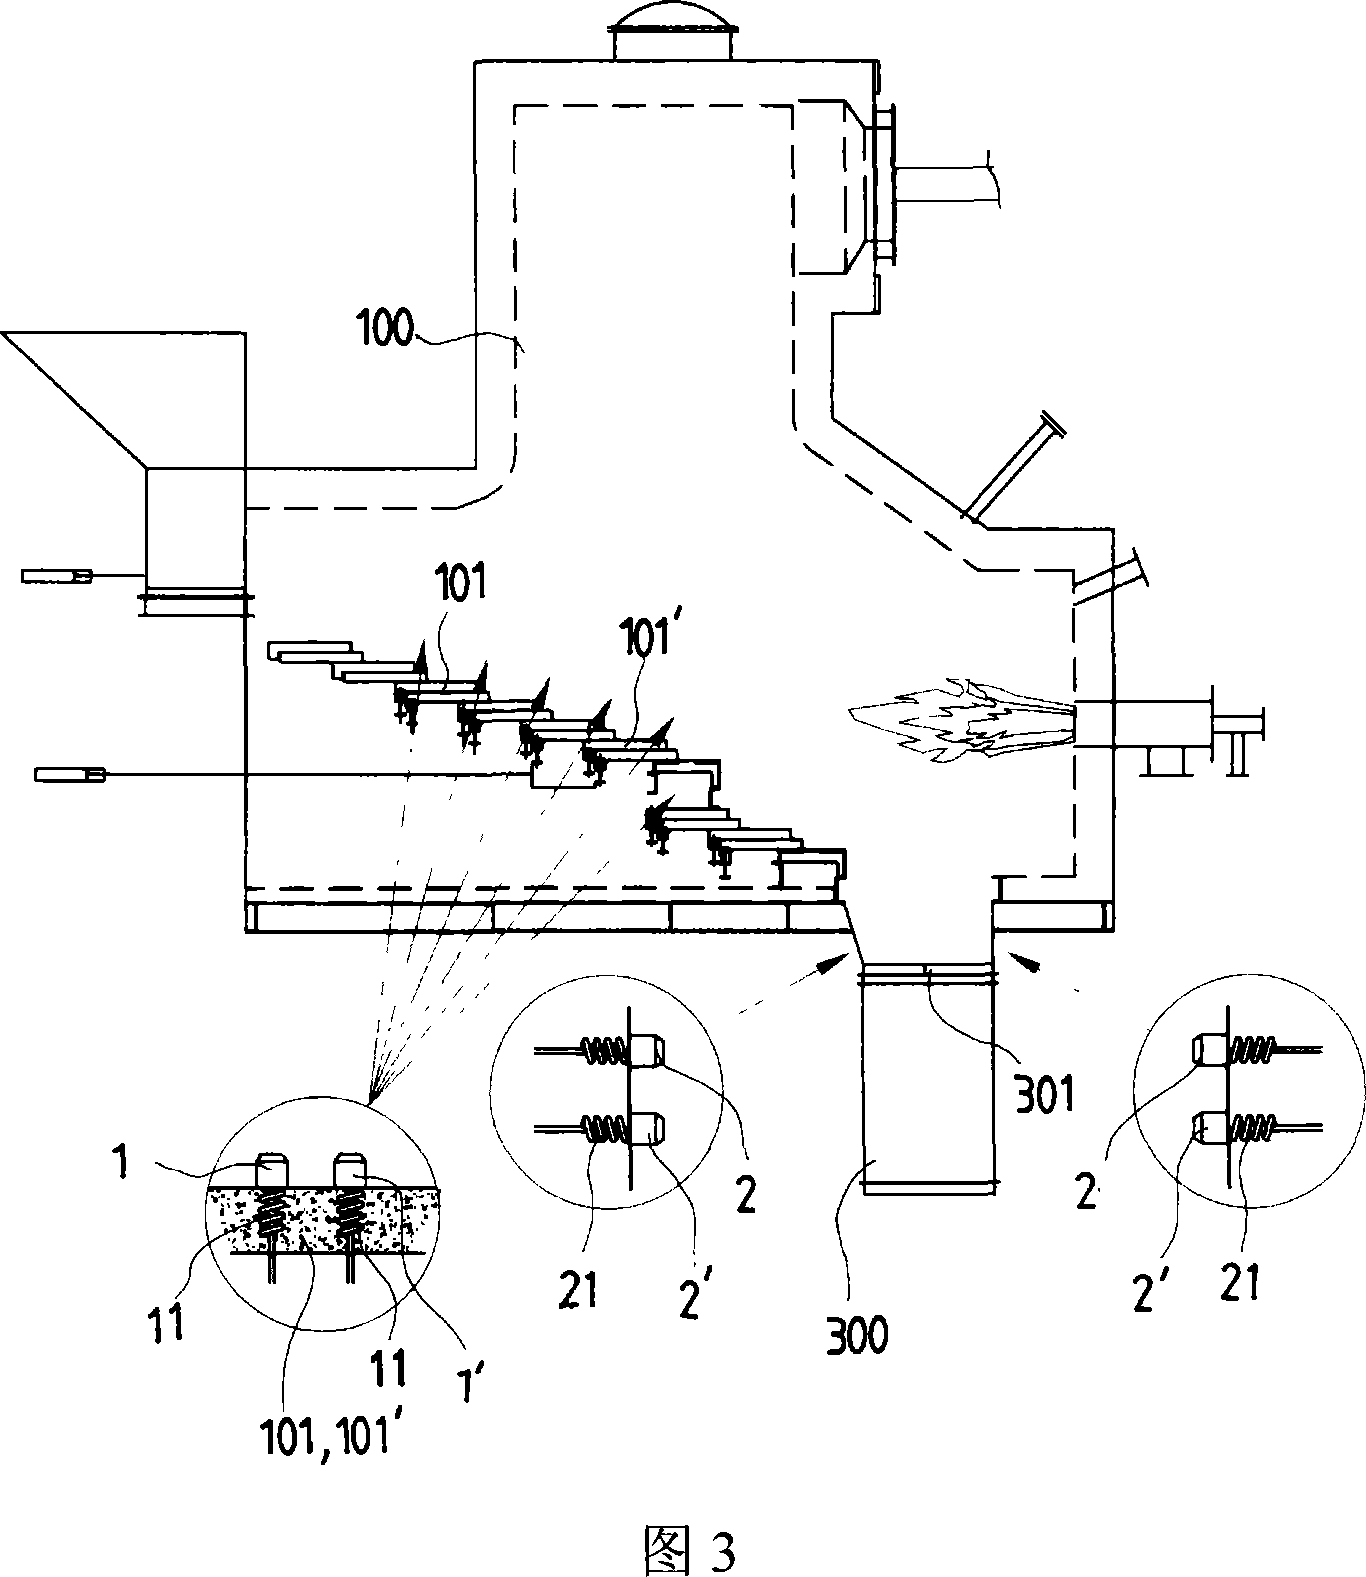 Combustion apparatus for r.p.f boiler